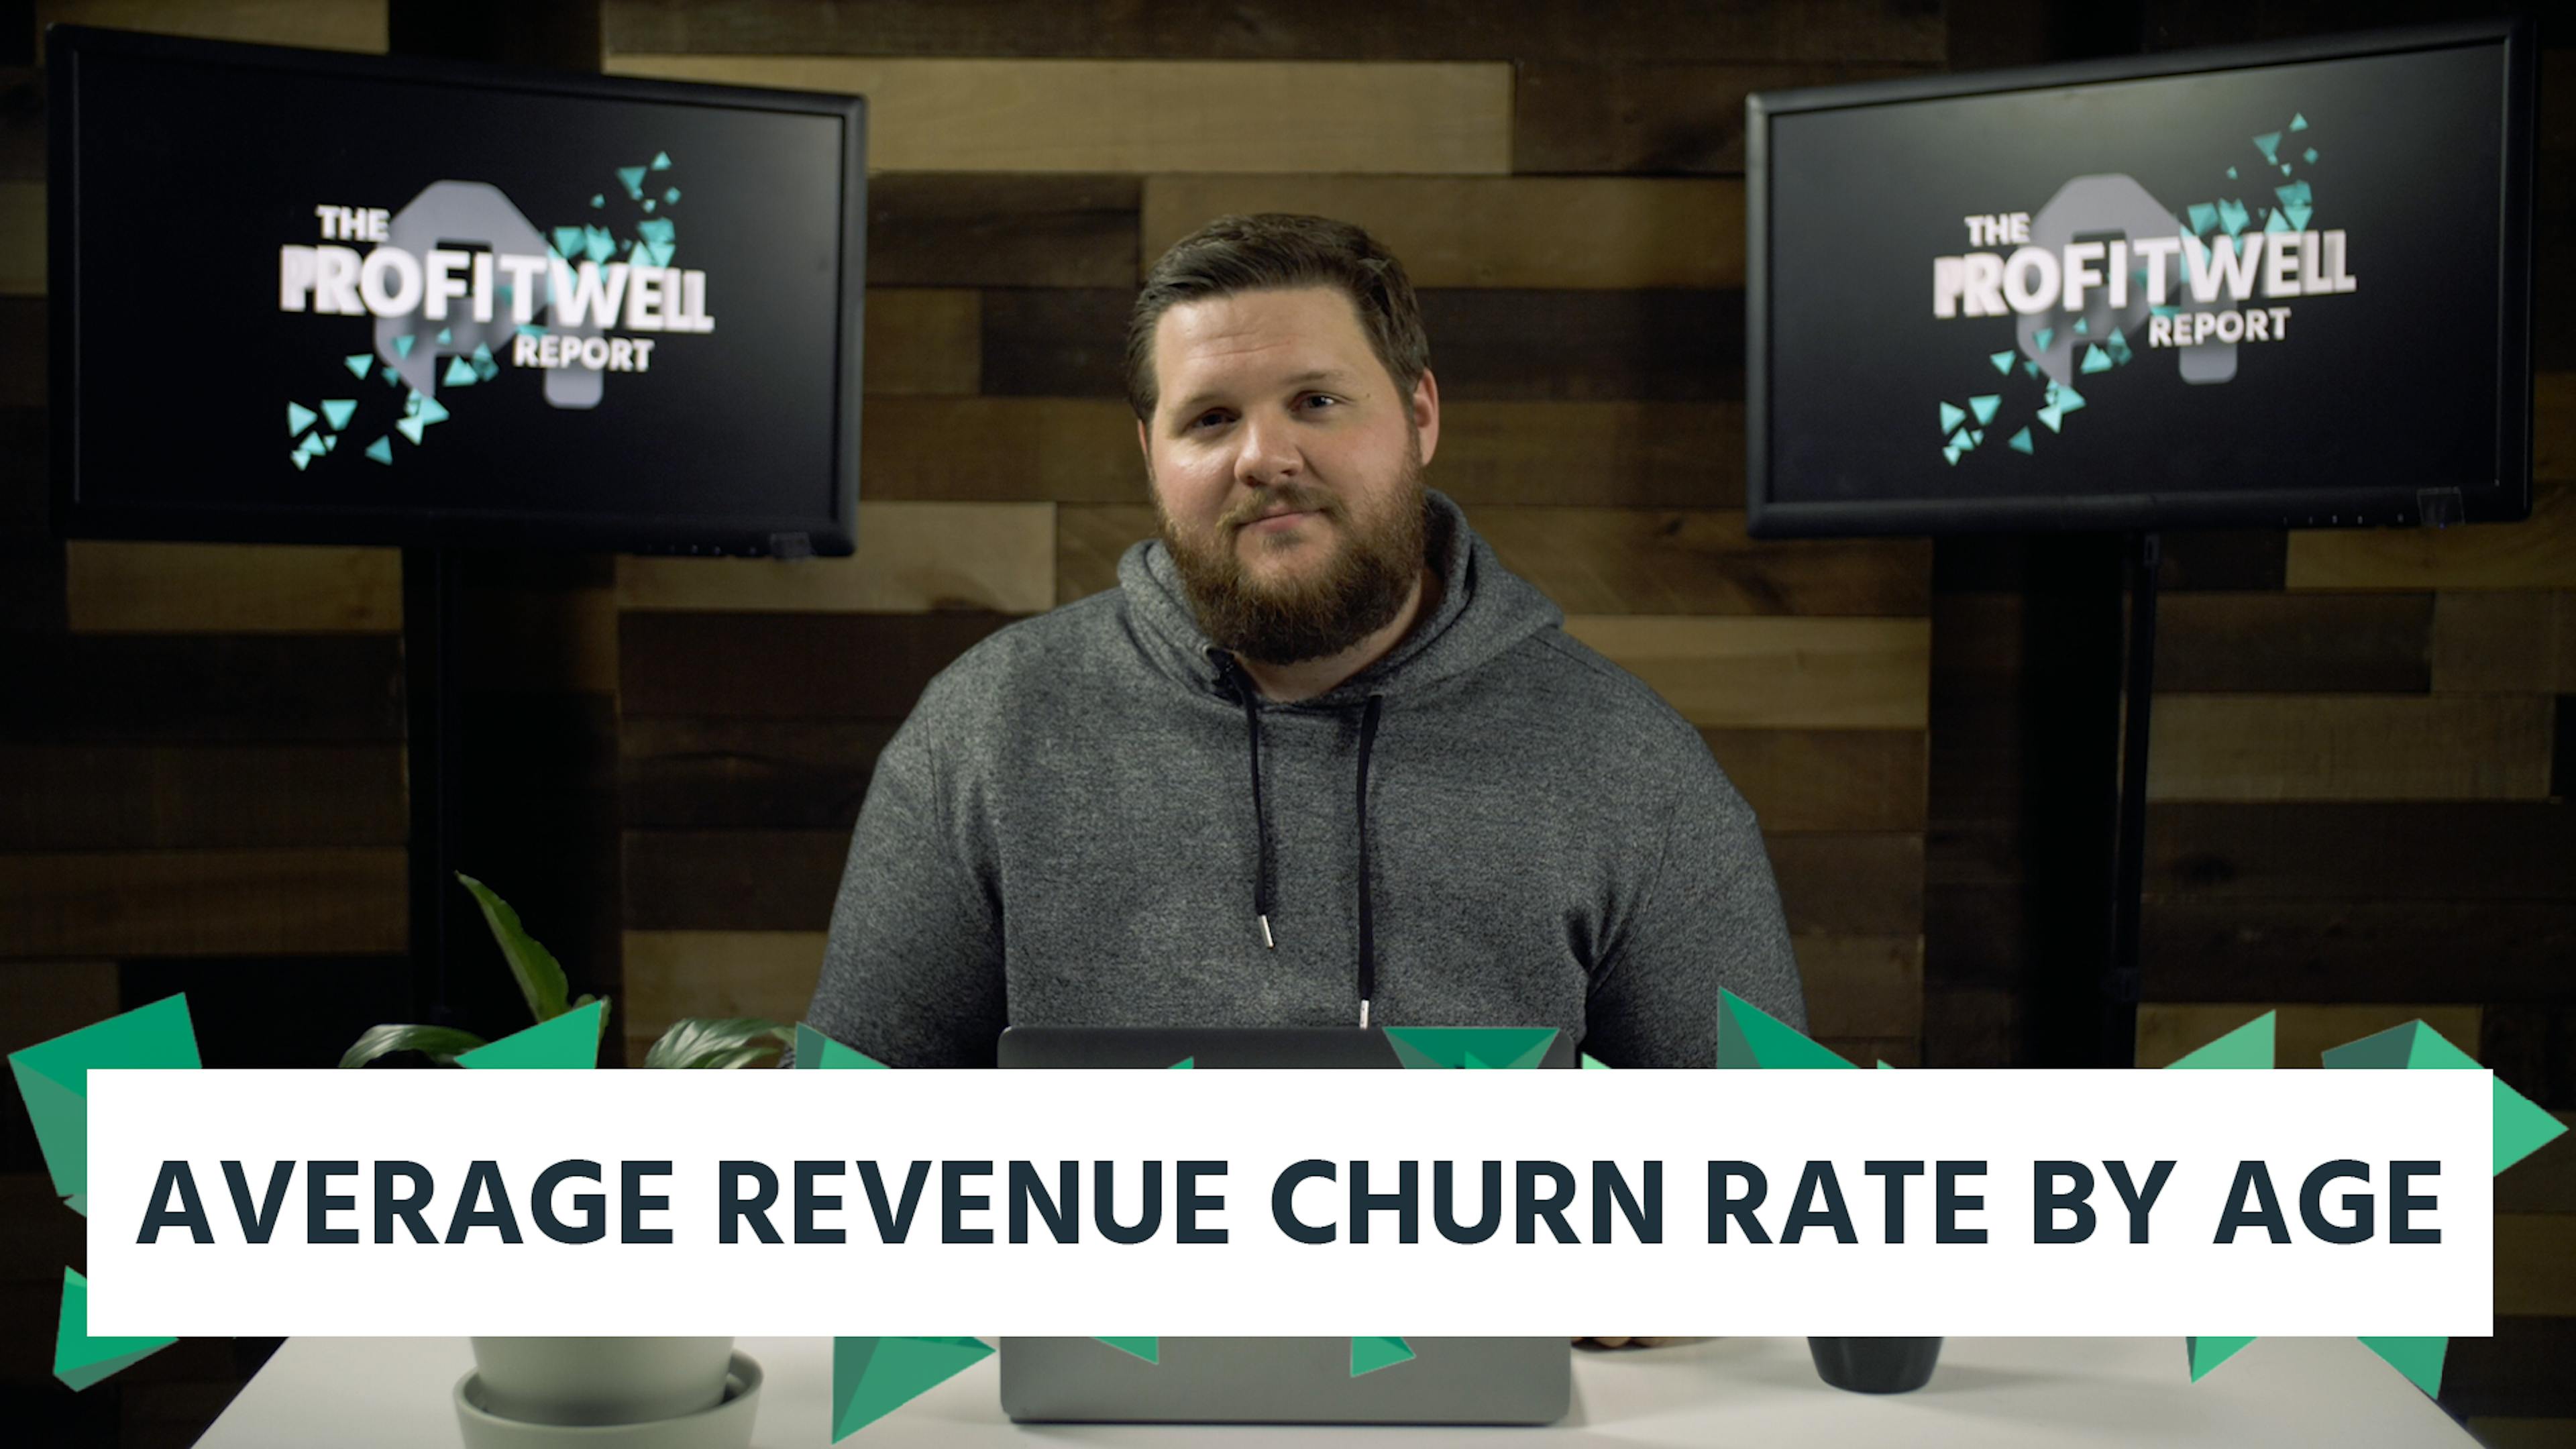 PWR Thumbnail - Average Revenue Churn Rate By Age